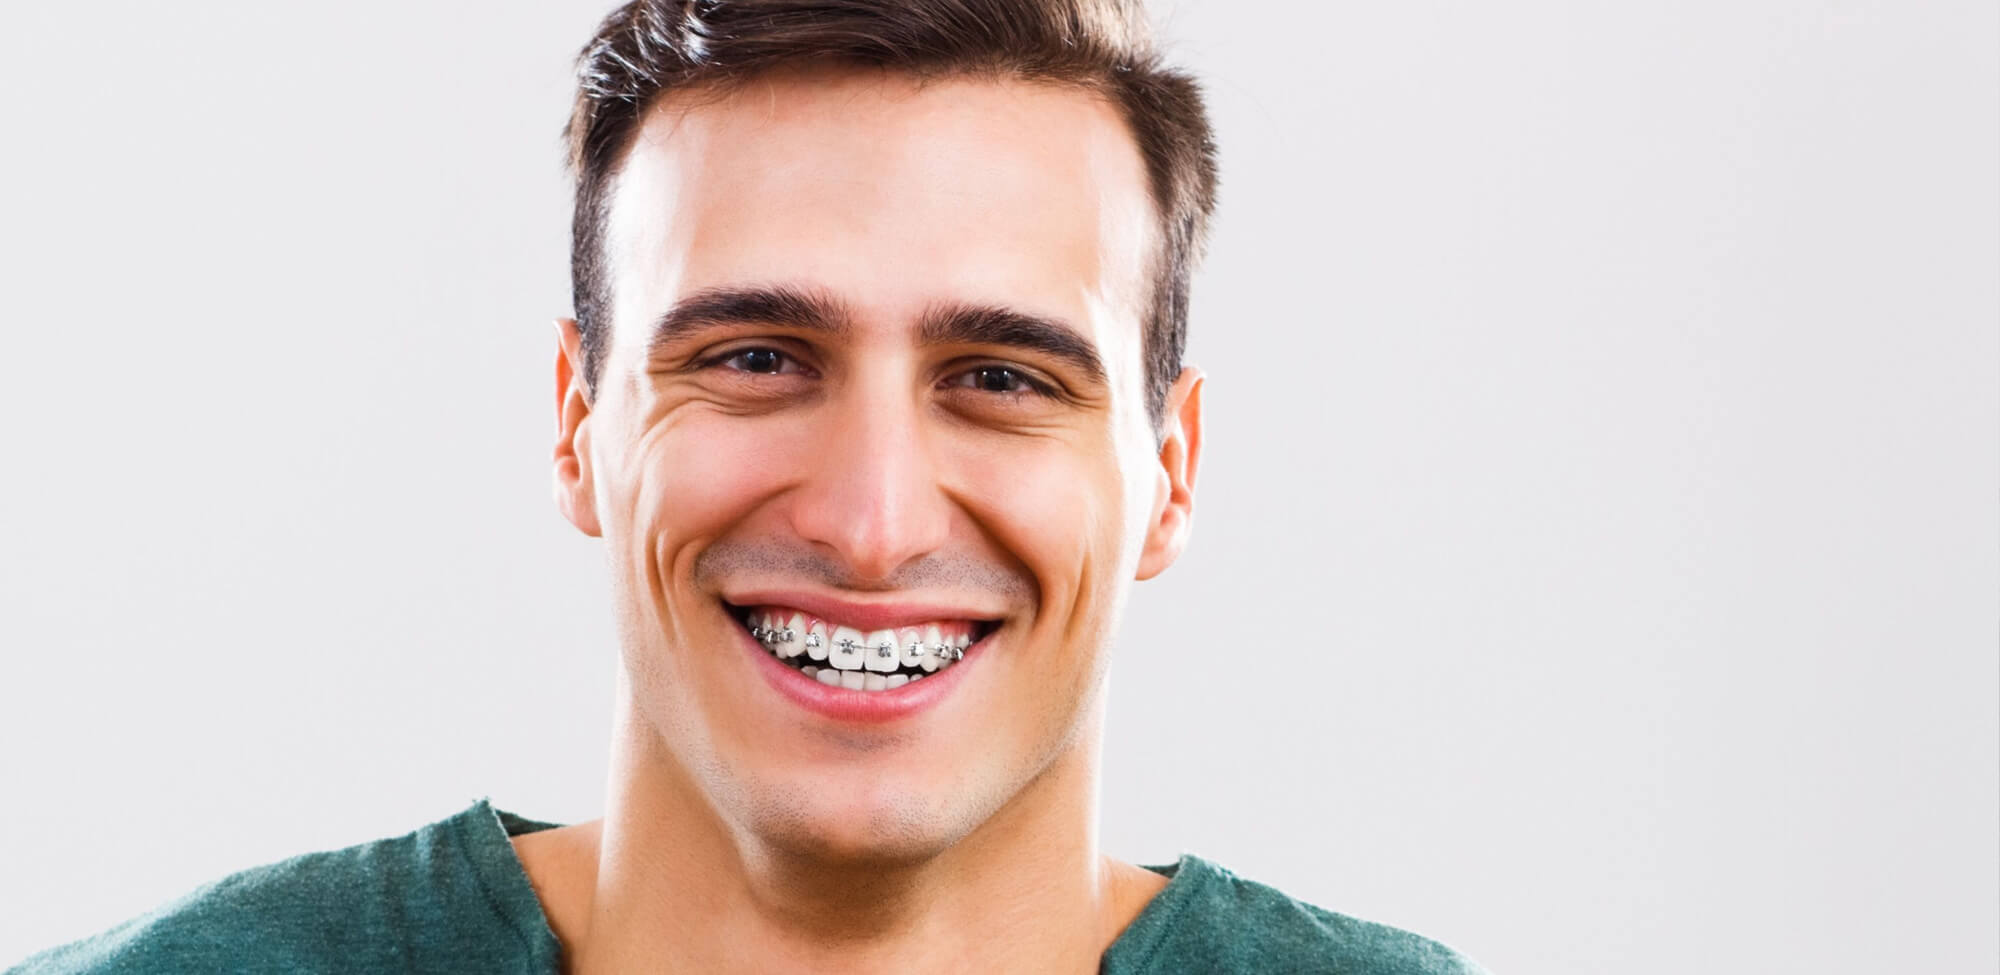 Getting Your Braces Off? Here’s What to Expect!